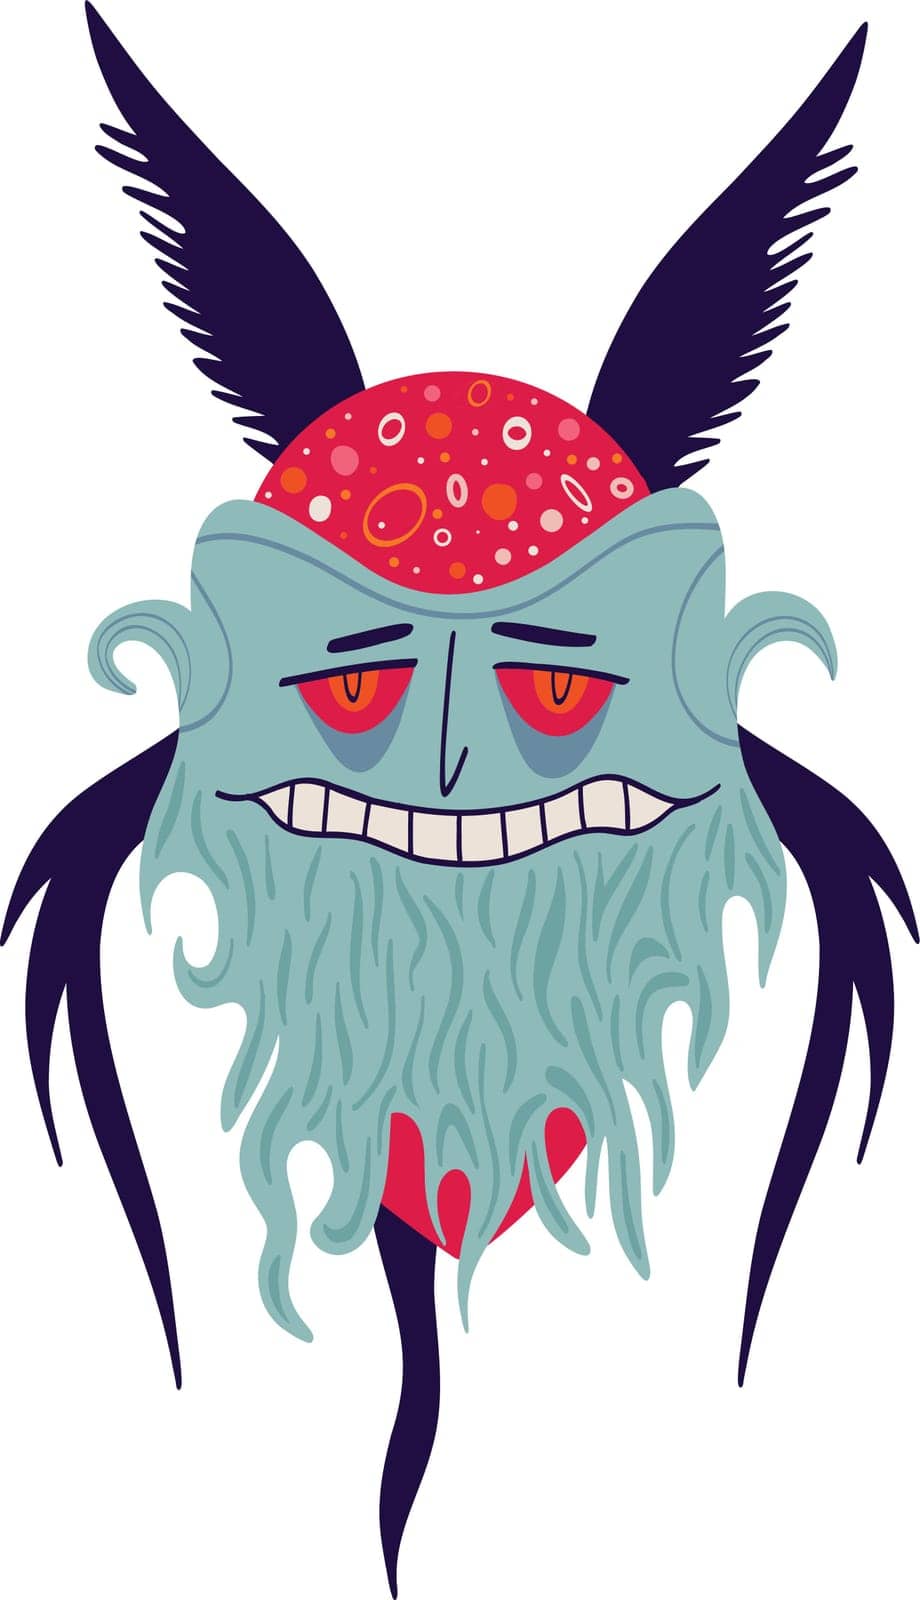 Creepy funny character monster gin with funny smile face. Illustration in a modern childish hand-drawn style